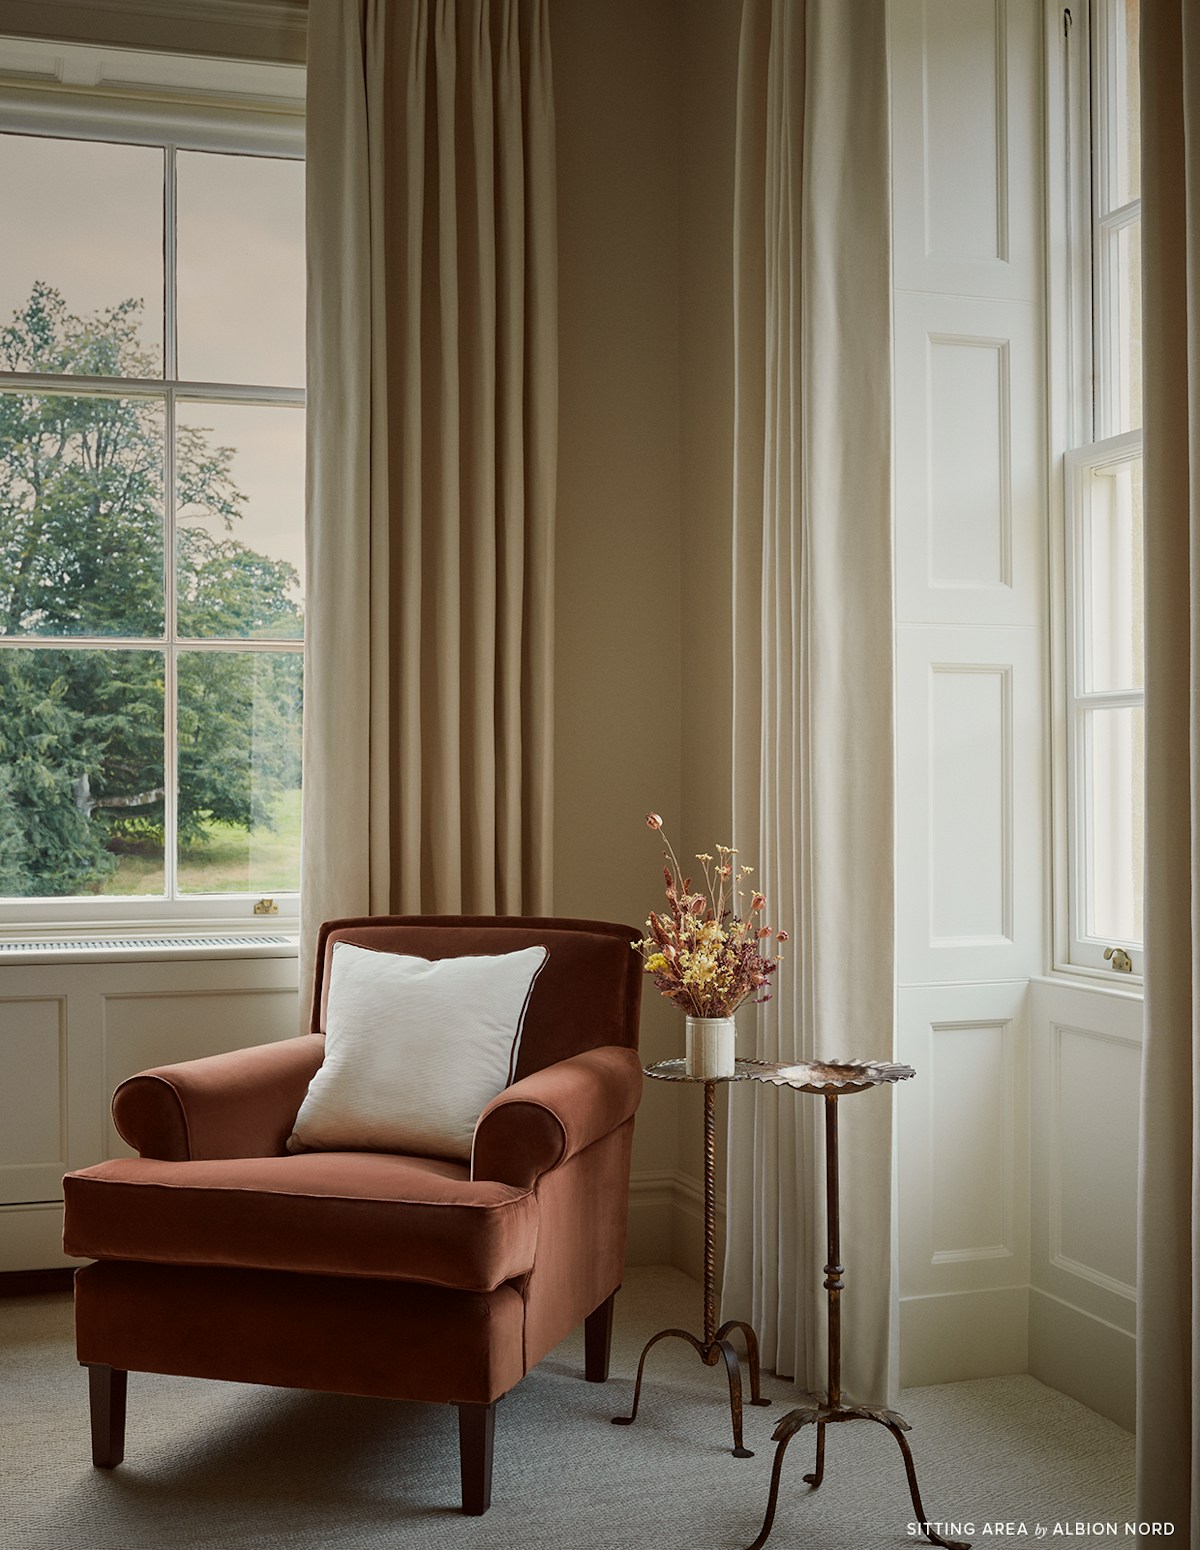 Luxury armchair and side tables in Heritage property